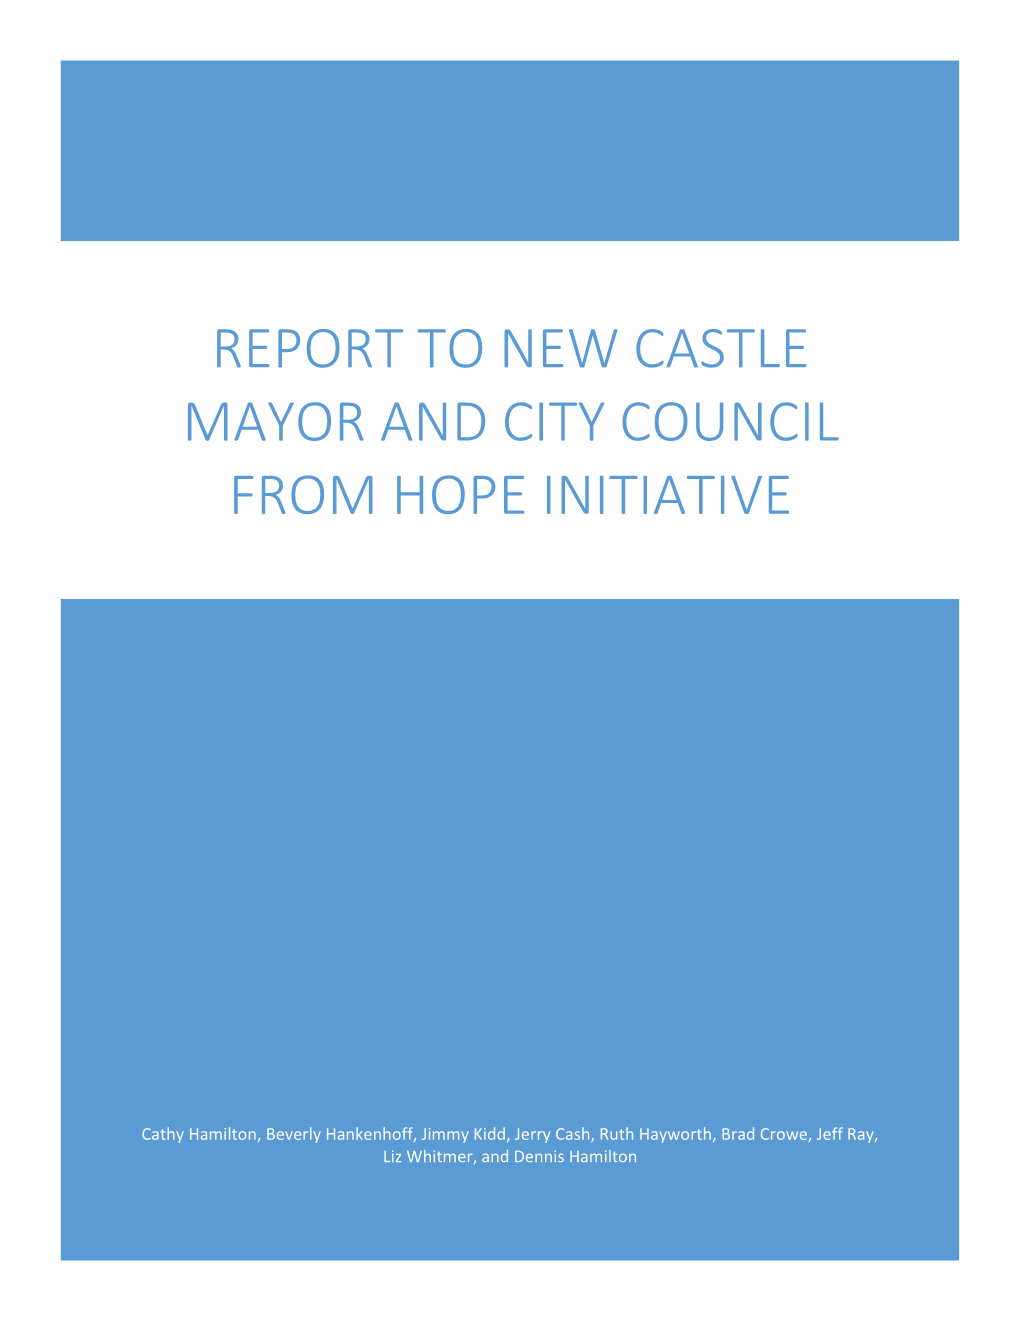 Report to New Castle Mayor and City Council from Hope Initiative